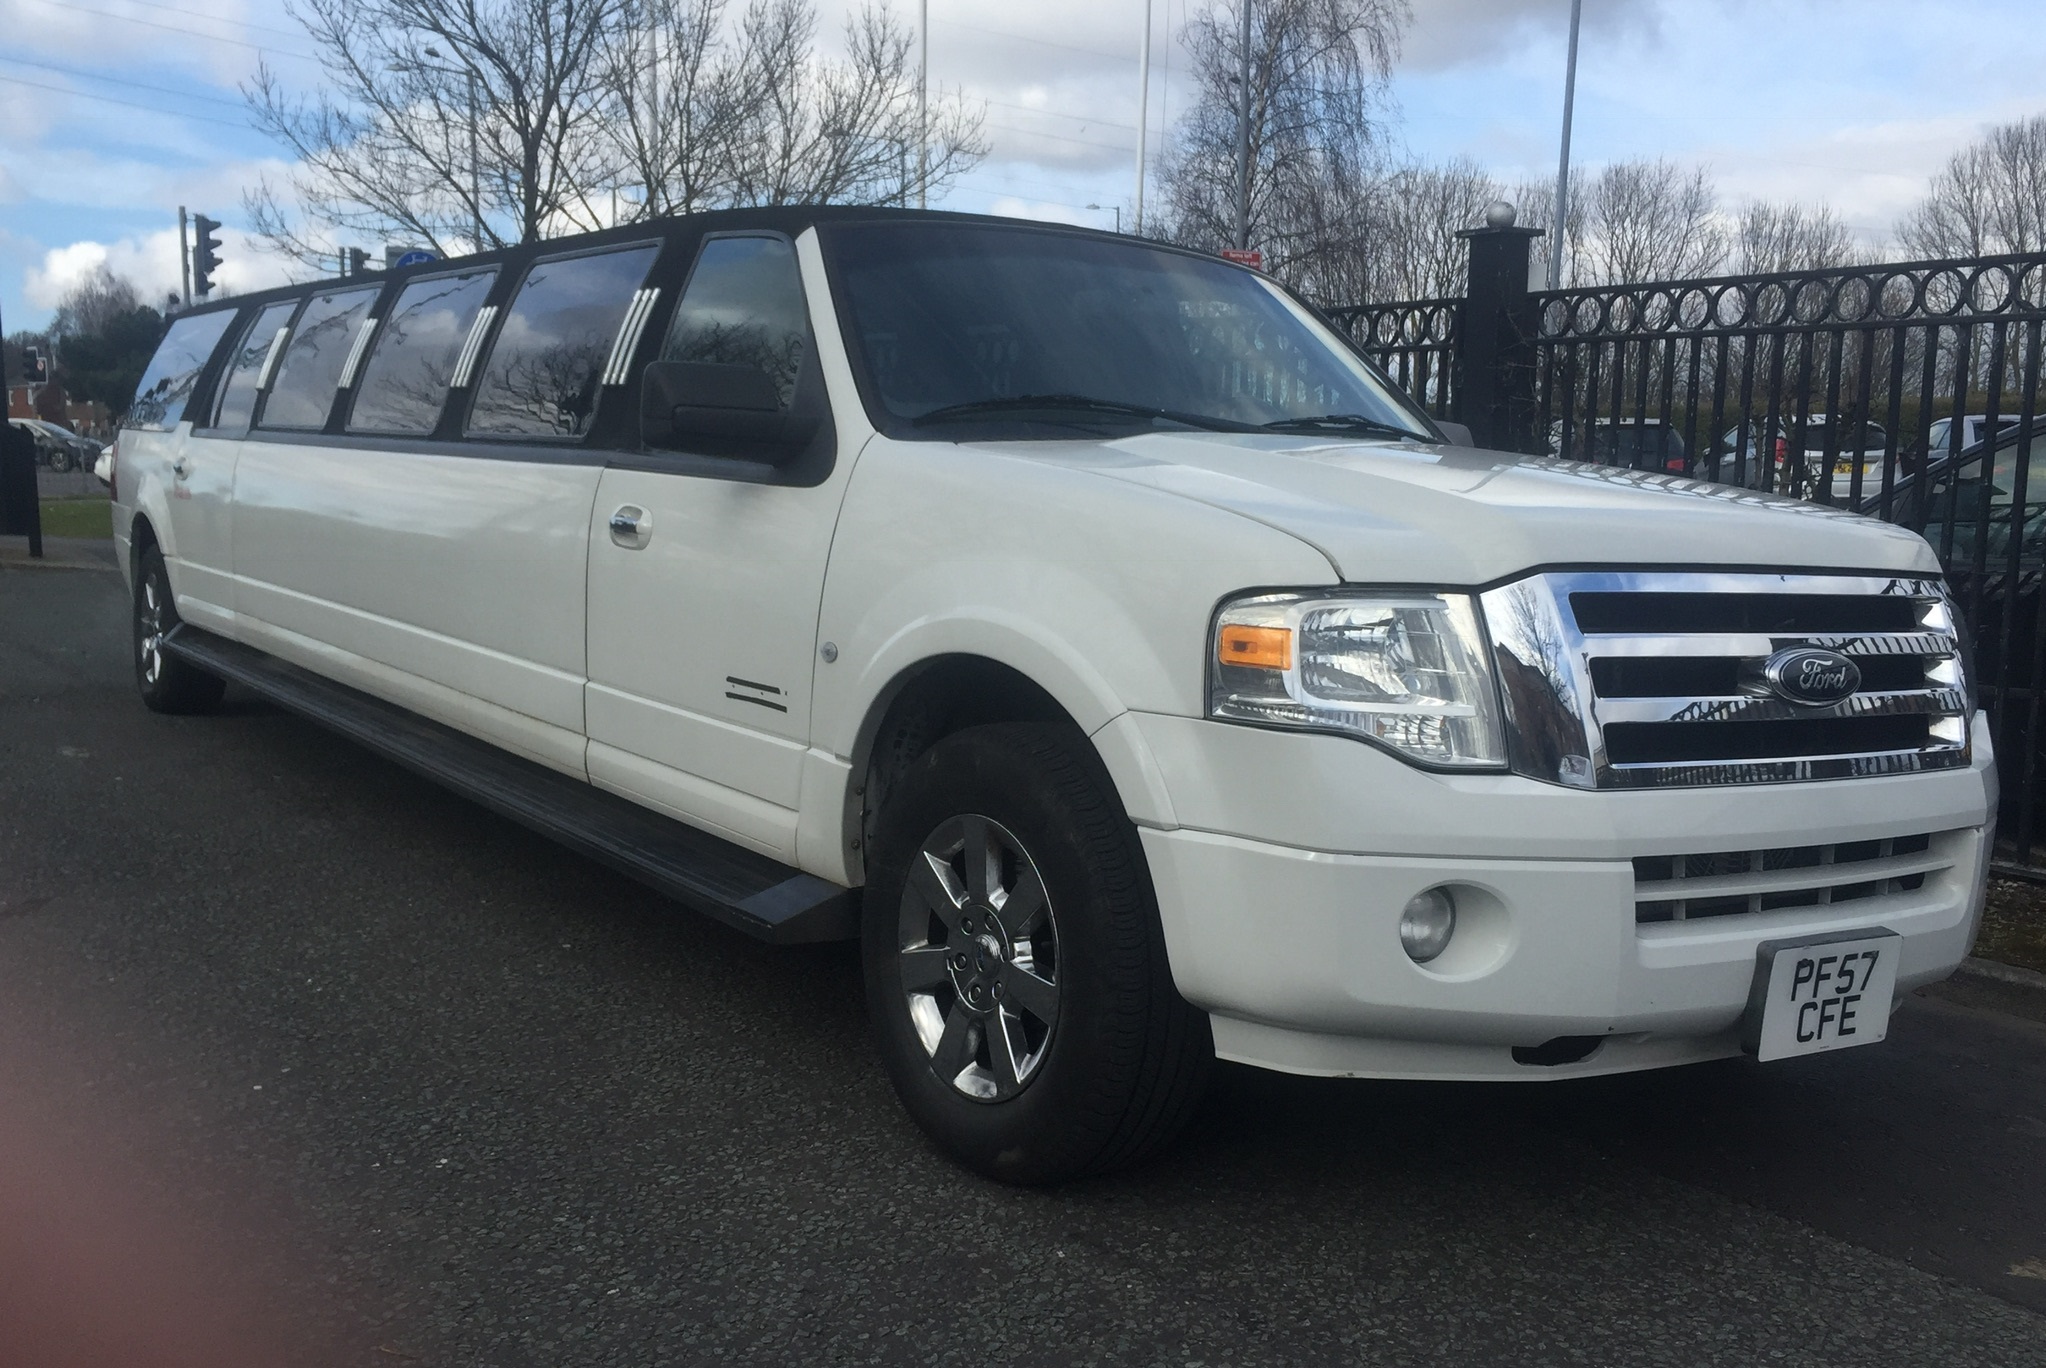 Expedition Limousine